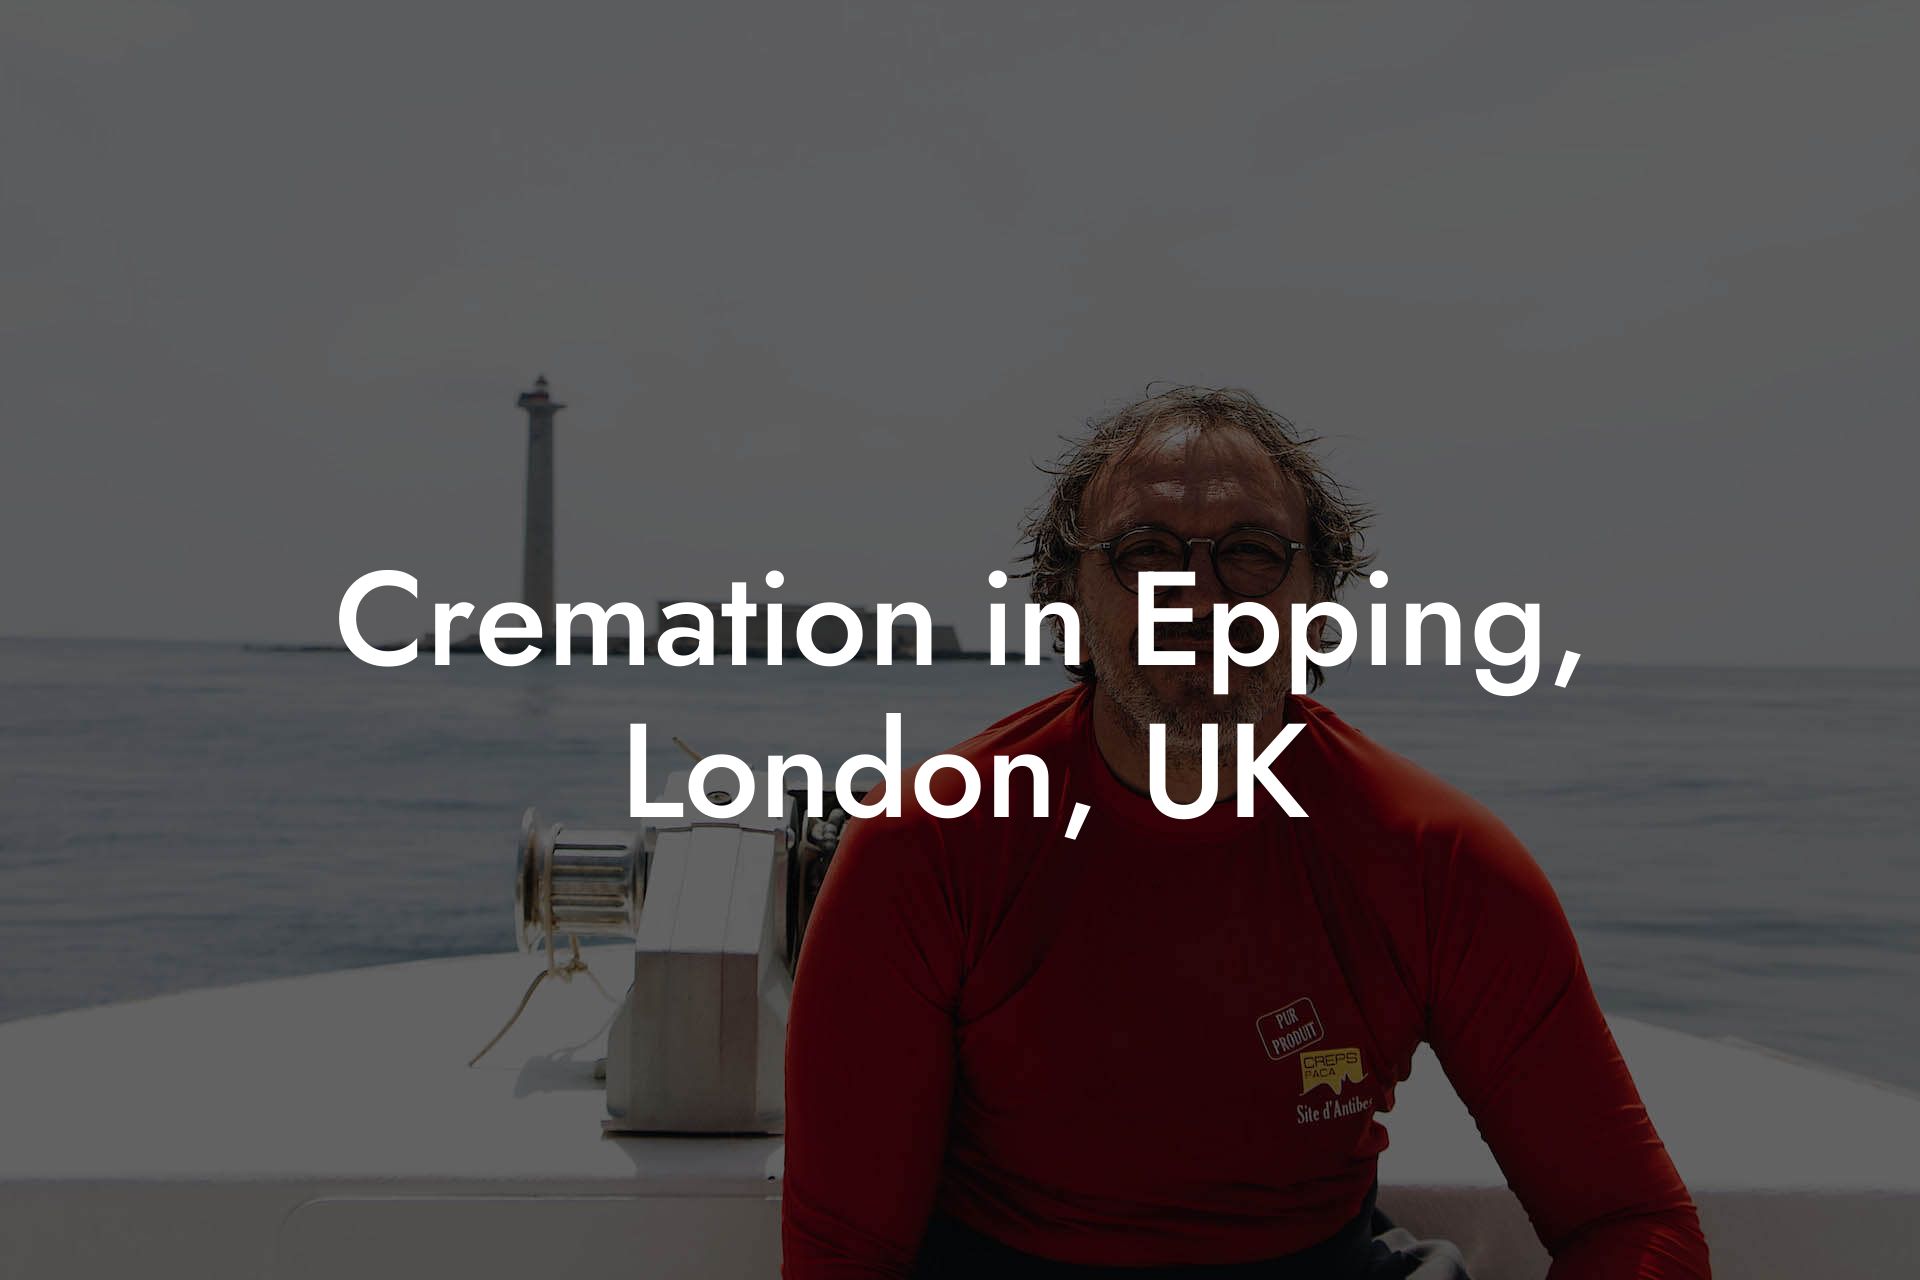 Cremation in Epping, London, UK